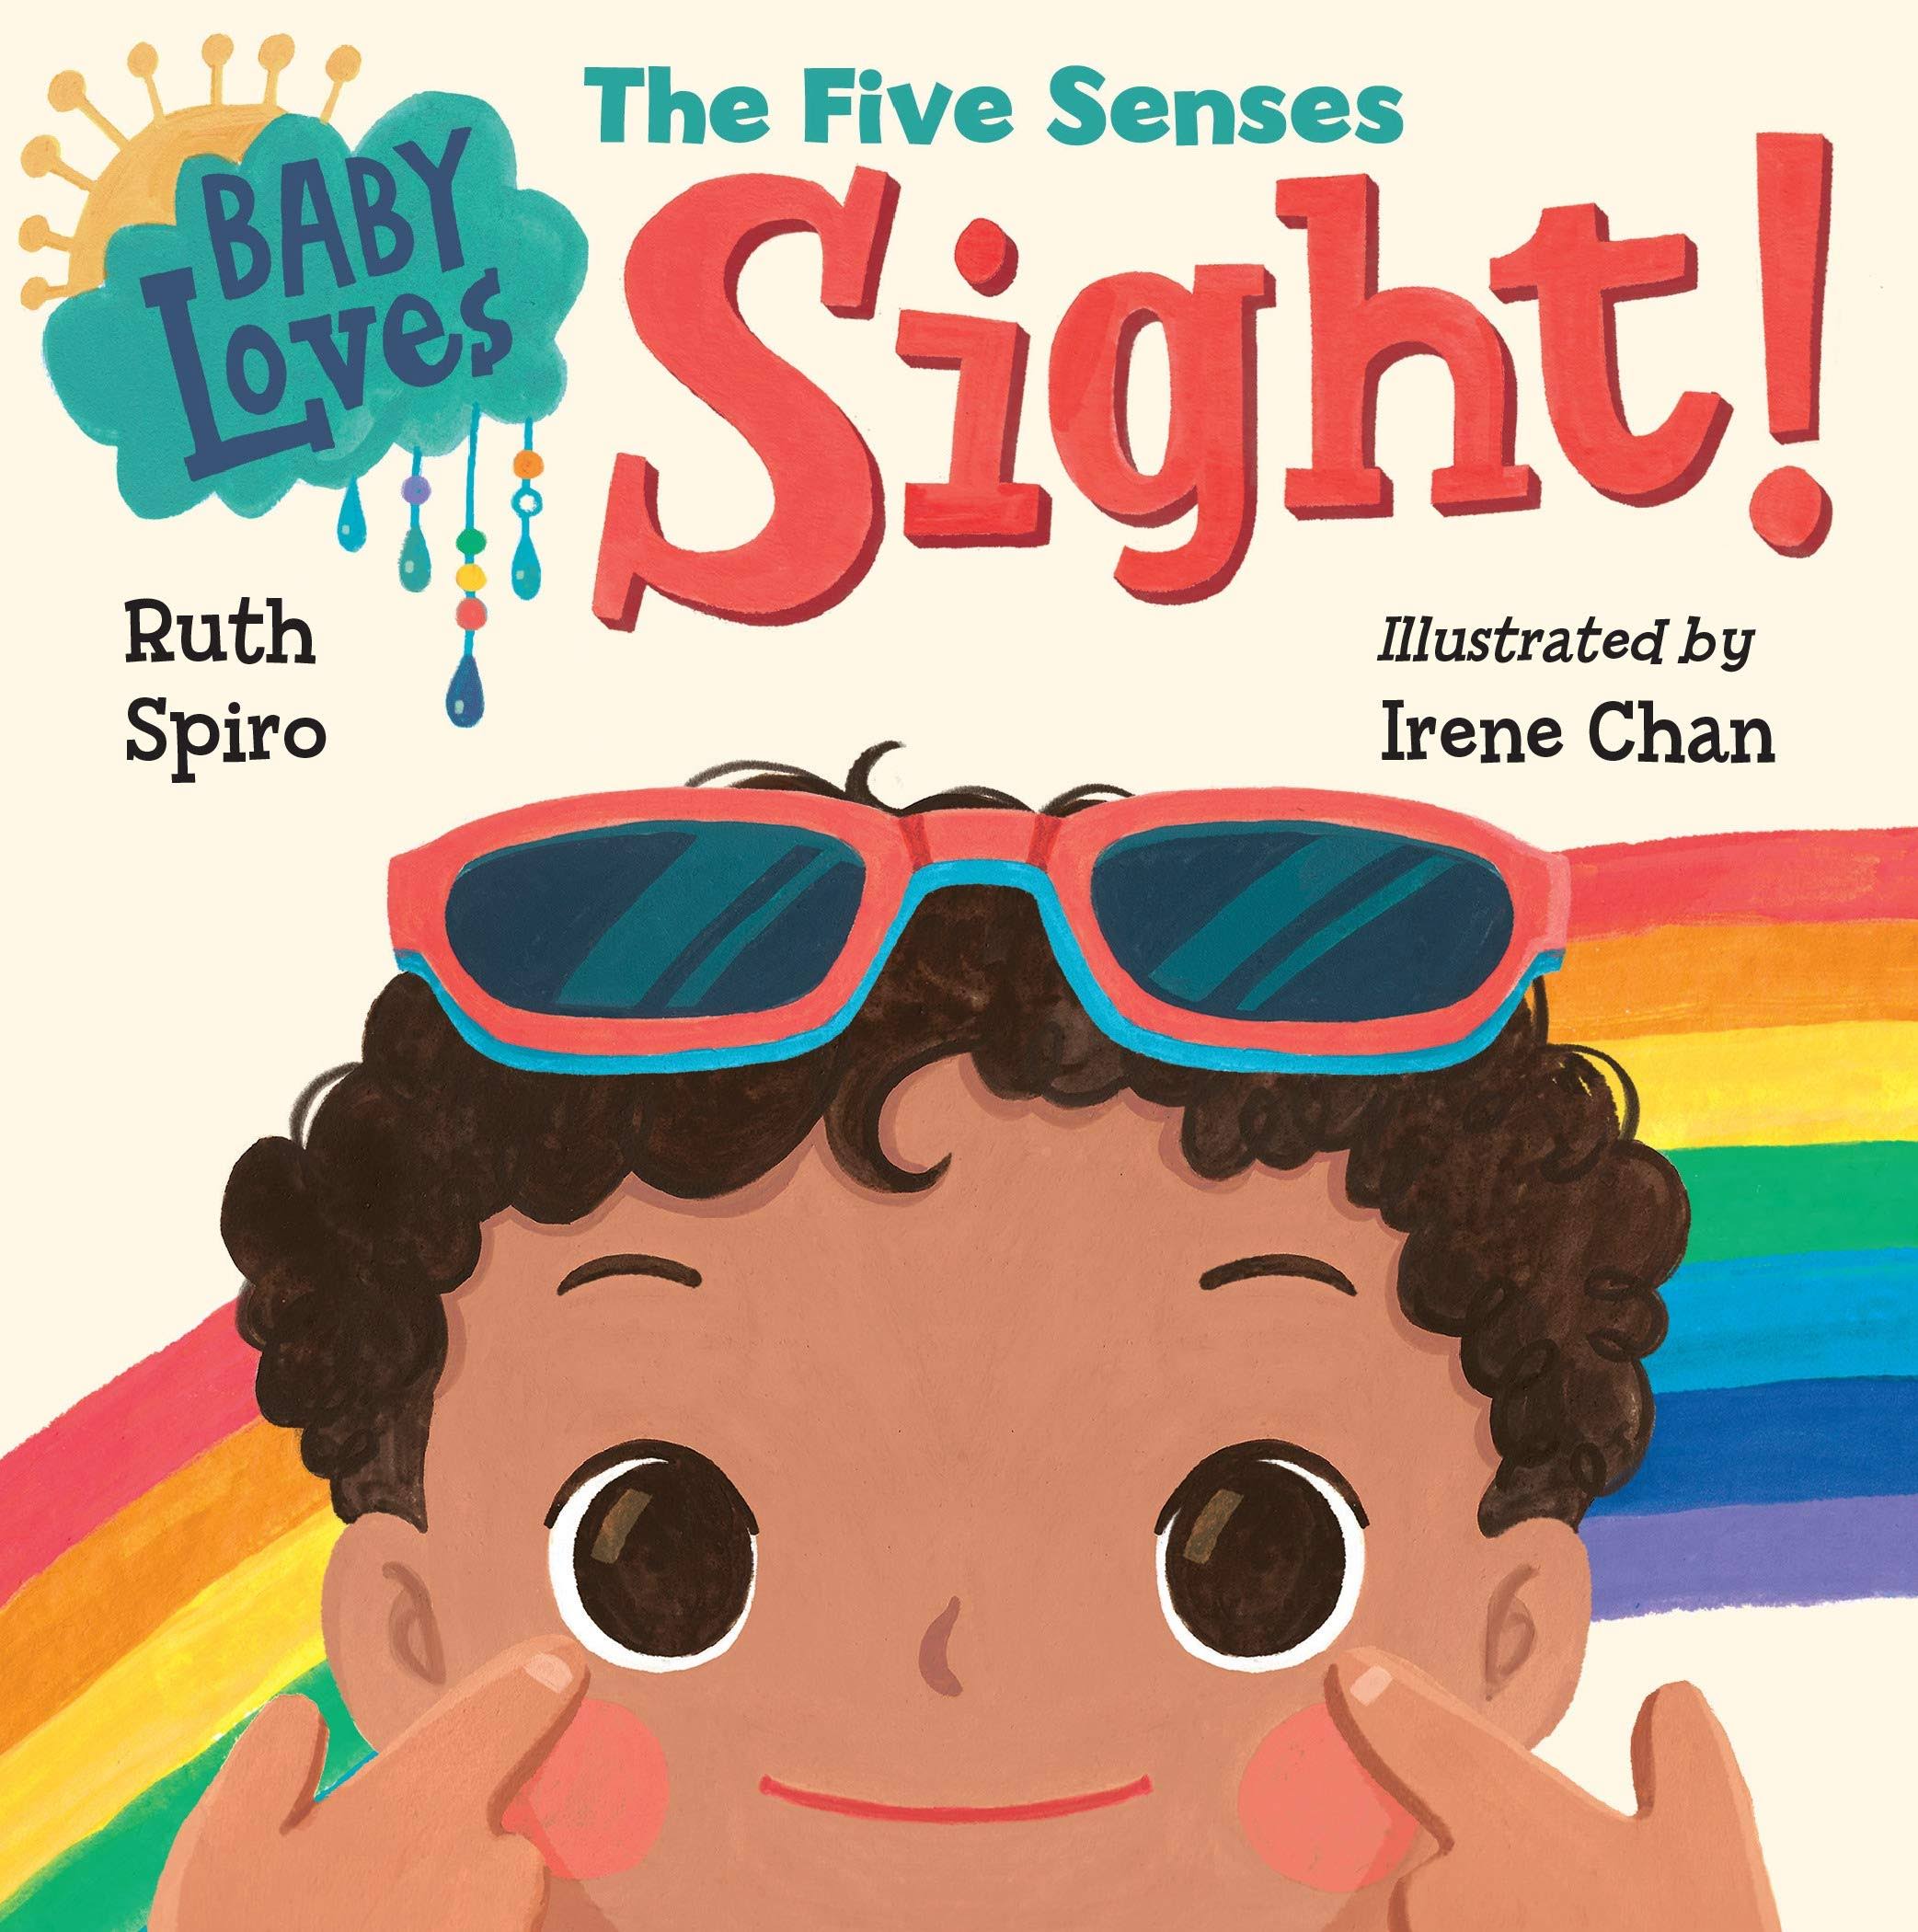 Baby Loves the Five Senses: Sight! [Book]